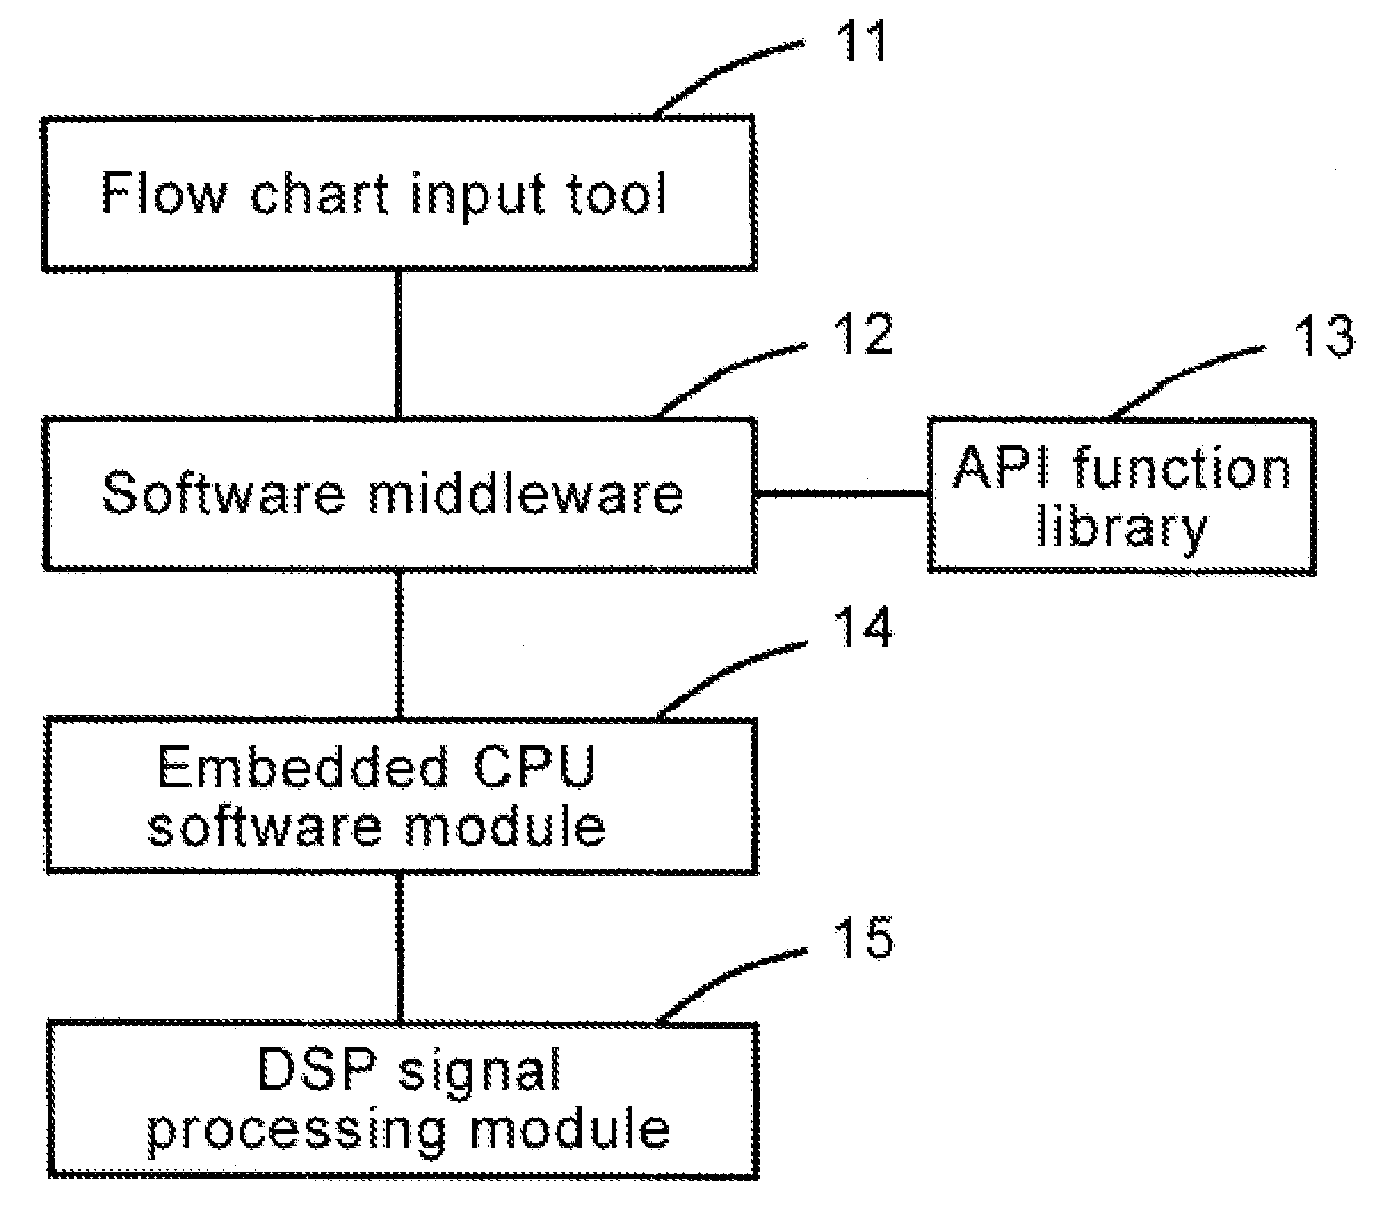 Approach and System for Process Execution of an Integrated Telecom Platform